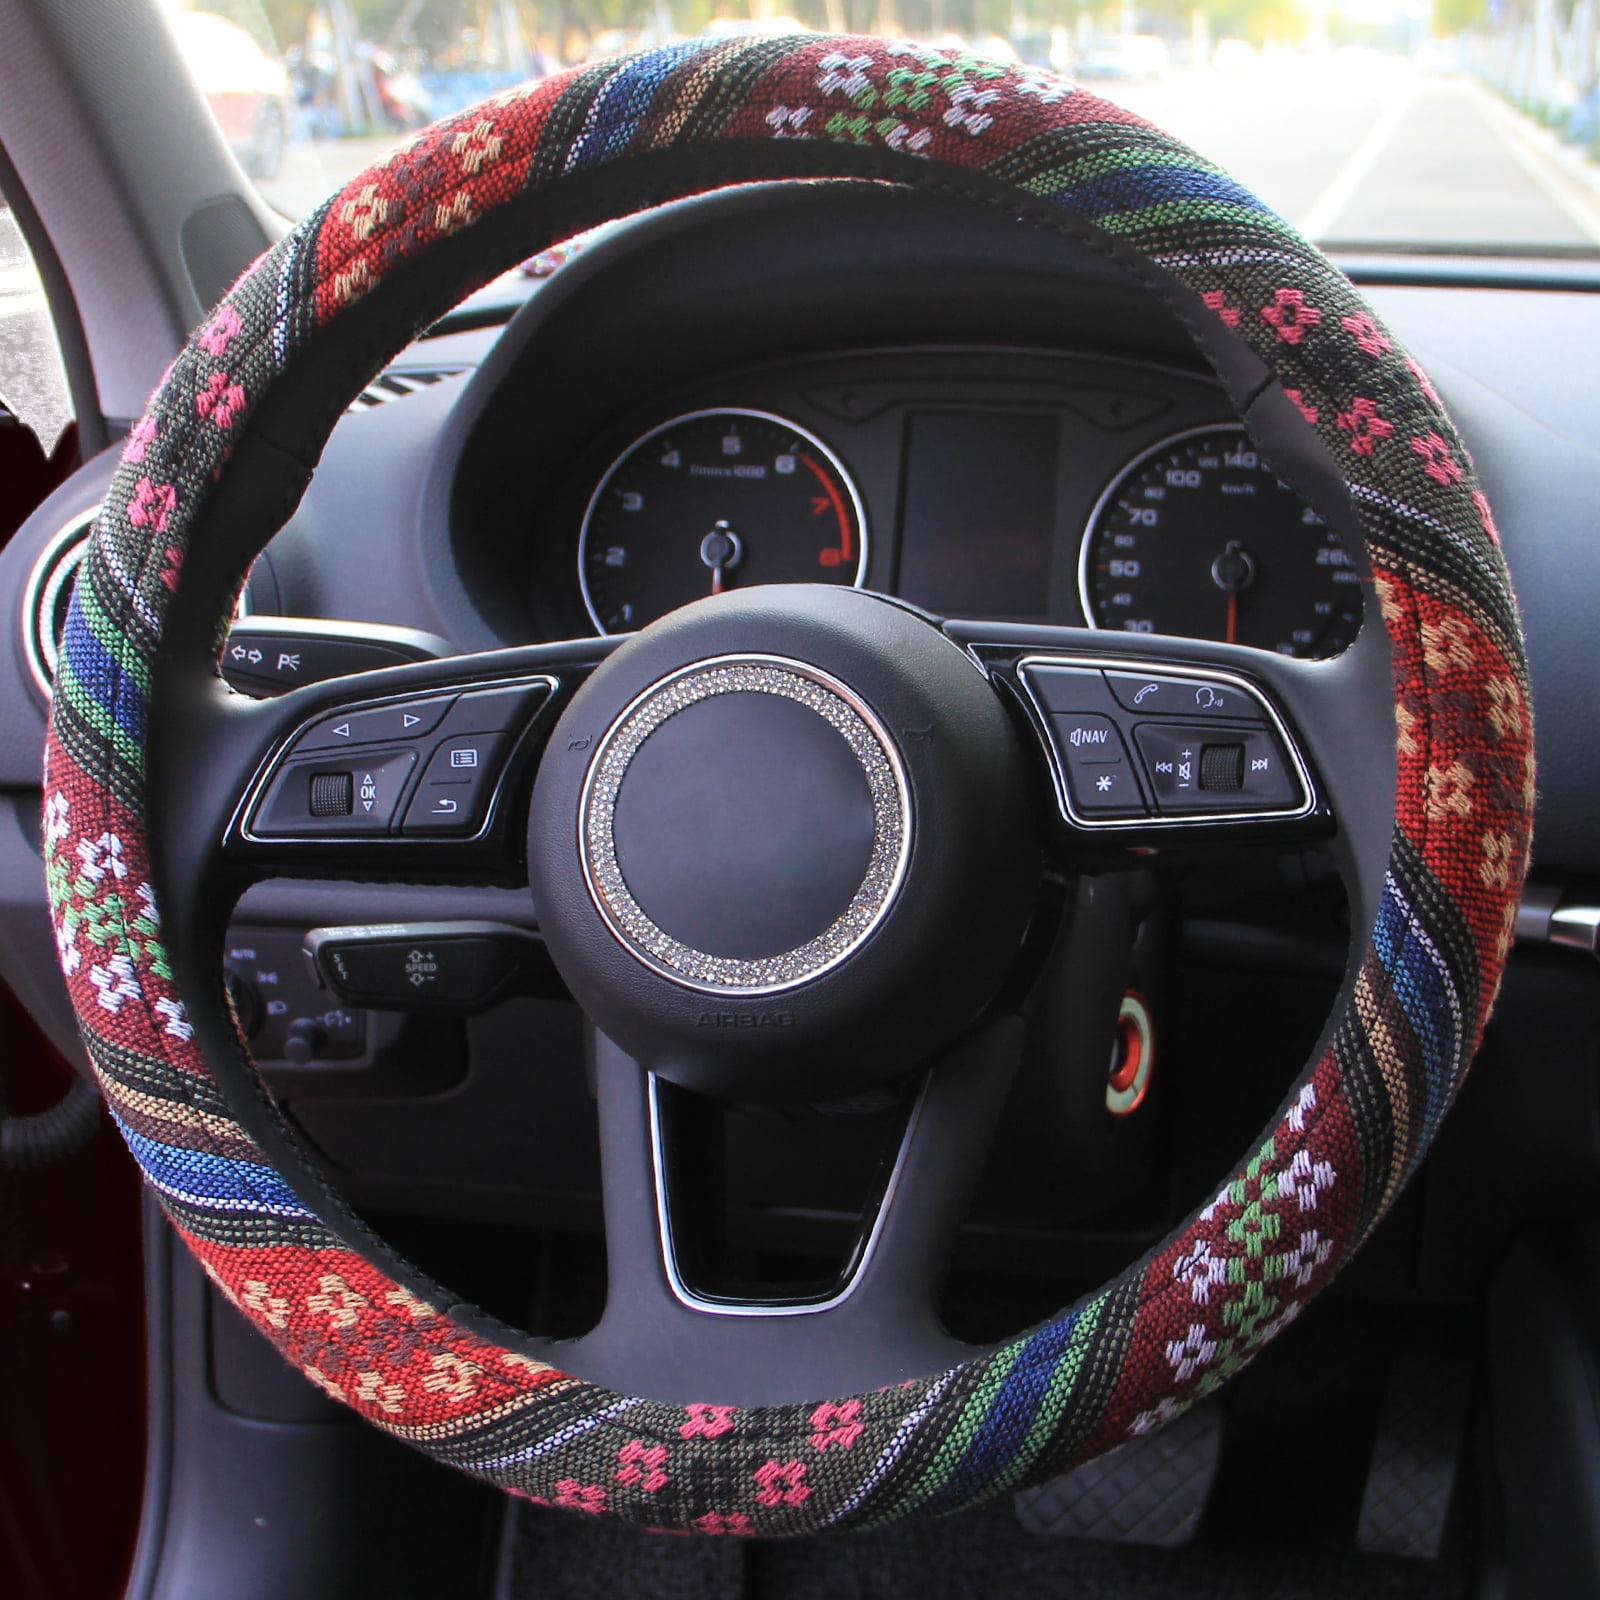 Hippie Steering Wheel Cover,15 inch Univerisal Steering Wheel Cover with Memory Flom for Women,Cloth Baja Blanket Enthic Steering Wheel Cover with Pretty Driving Feel.Boho-Gold2 